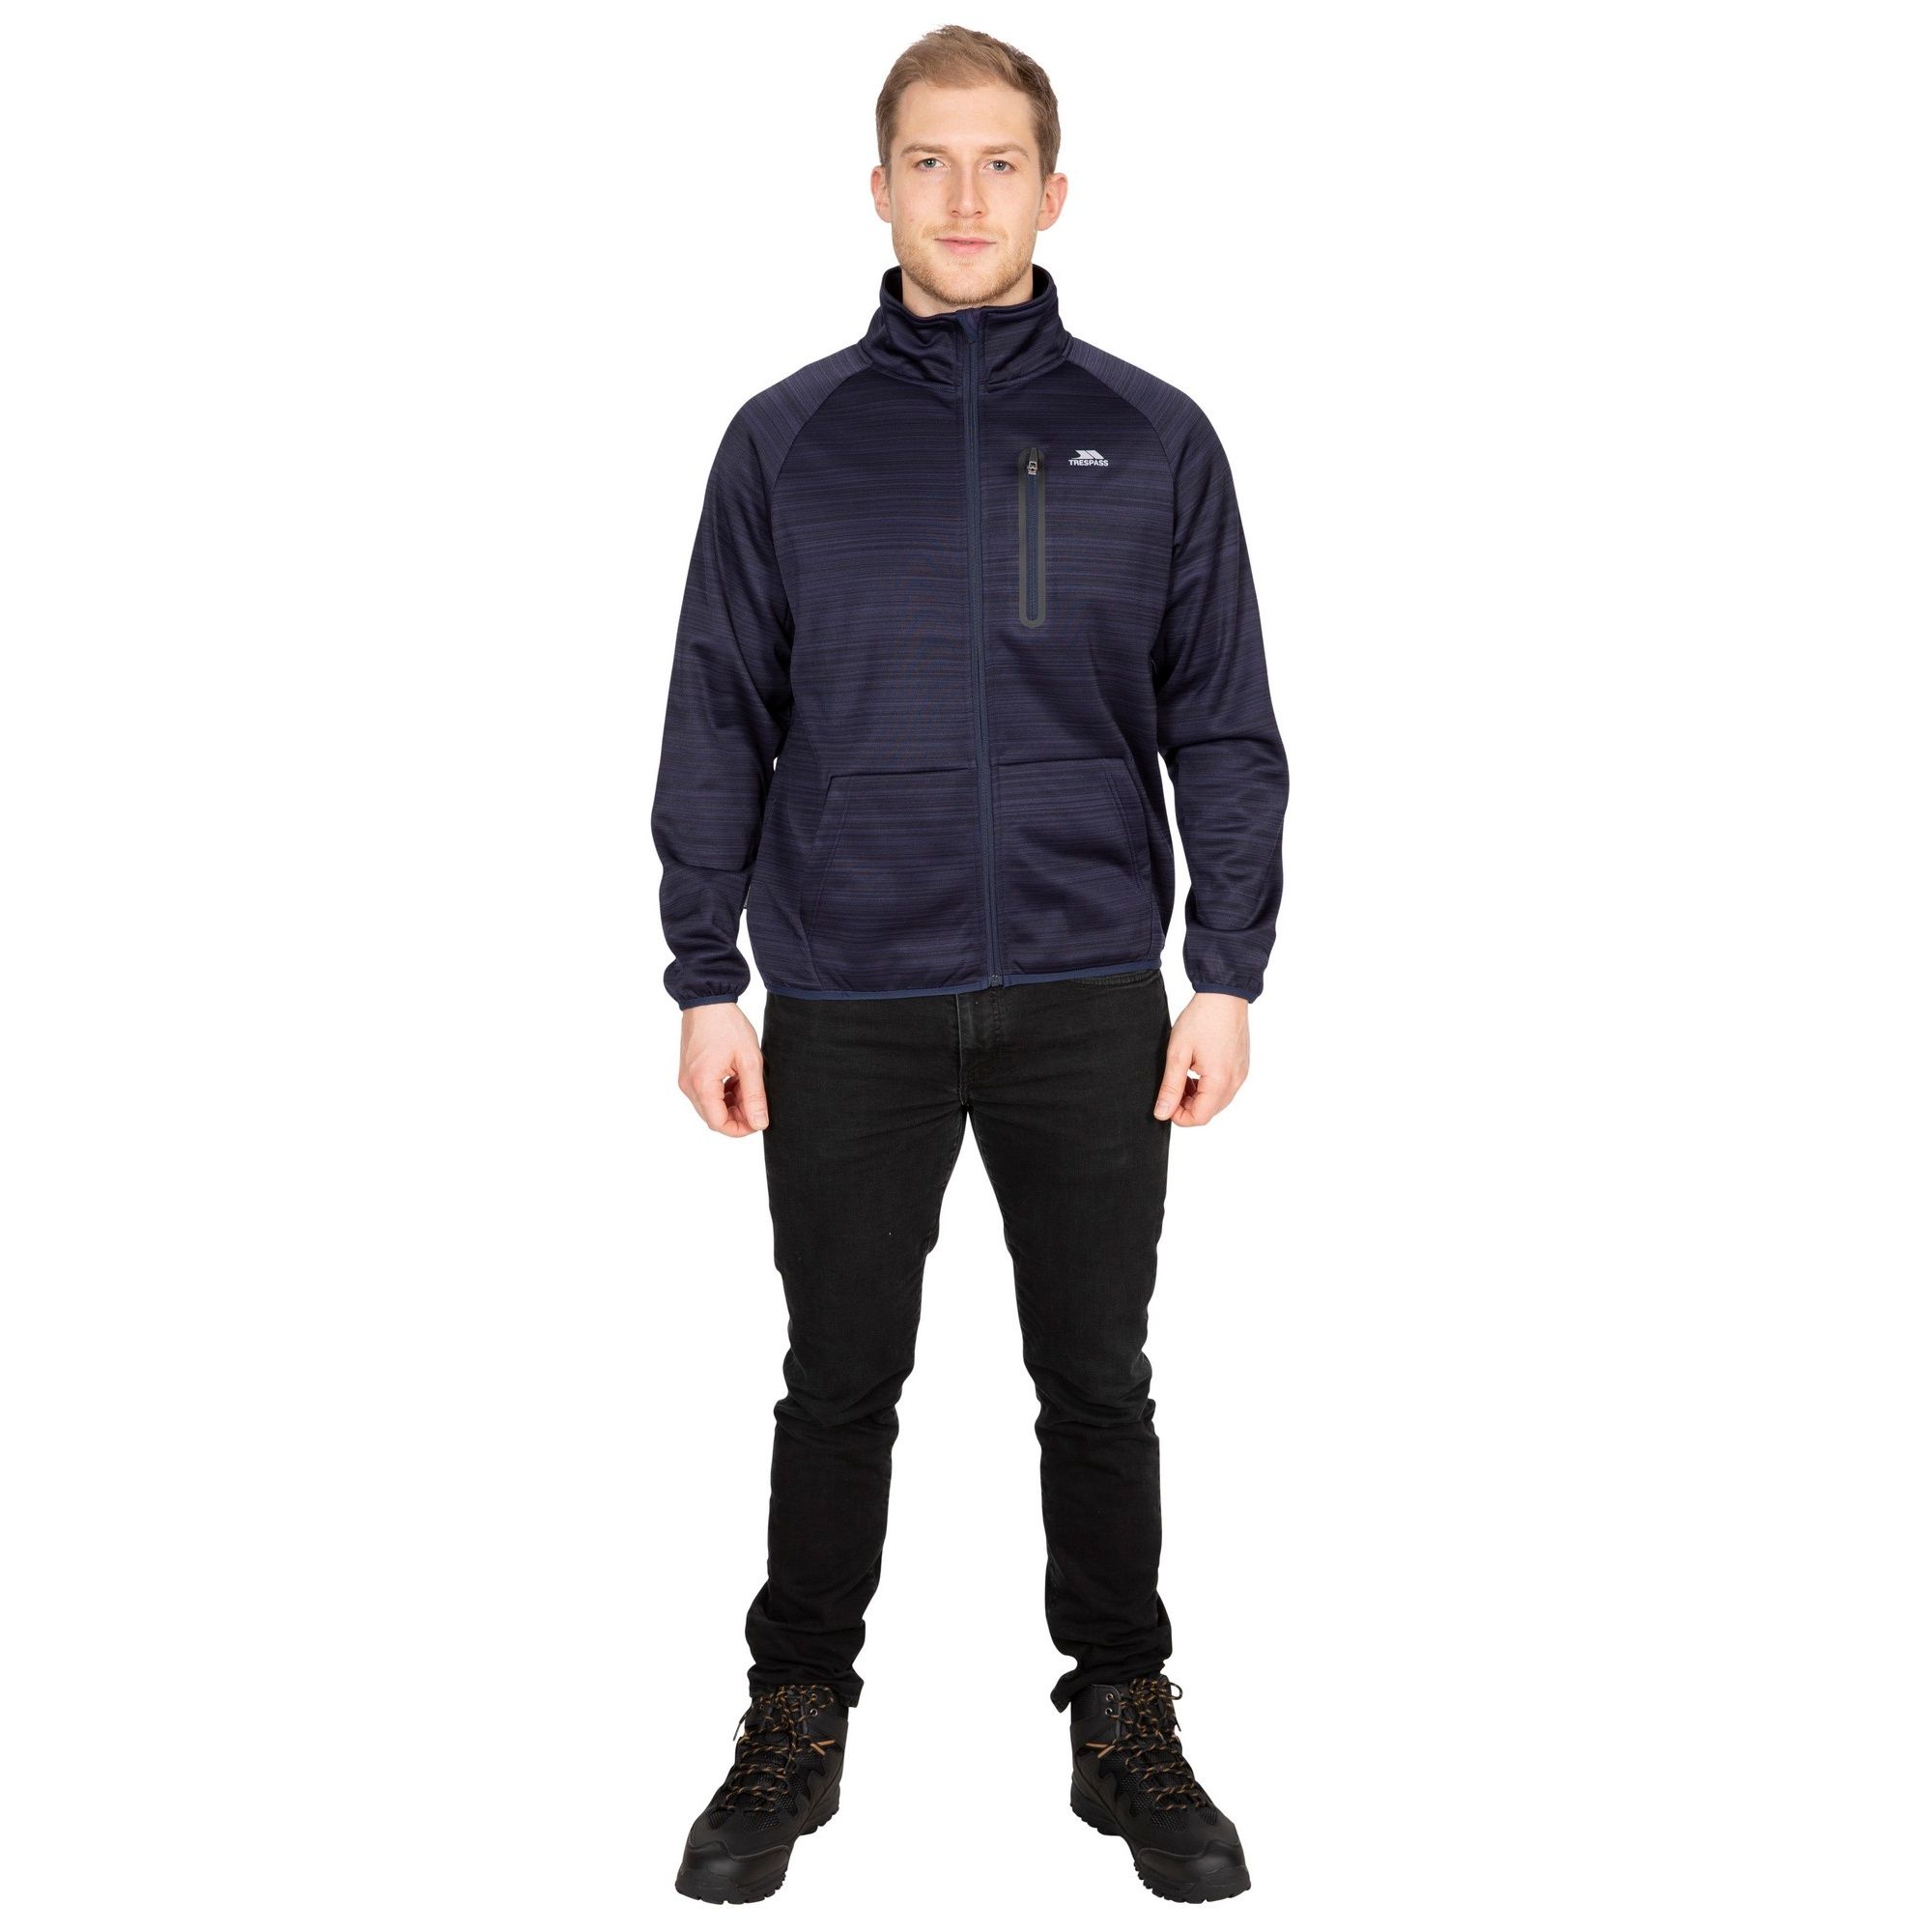 100% Polyester. Airtrap. 230gsm. 3 zipped pockets. Bonded chest pocket. Inner zip facing. Binding at hem and cuffs. Trespass Mens Chest Sizing (approx): S - 35-37in/89-94cm, M - 38-40in/96.5-101.5cm, L - 41-43in/104-109cm, XL - 44-46in/111.5-117cm, XXL - 46-48in/117-122cm, 3XL - 48-50in/122-127cm.